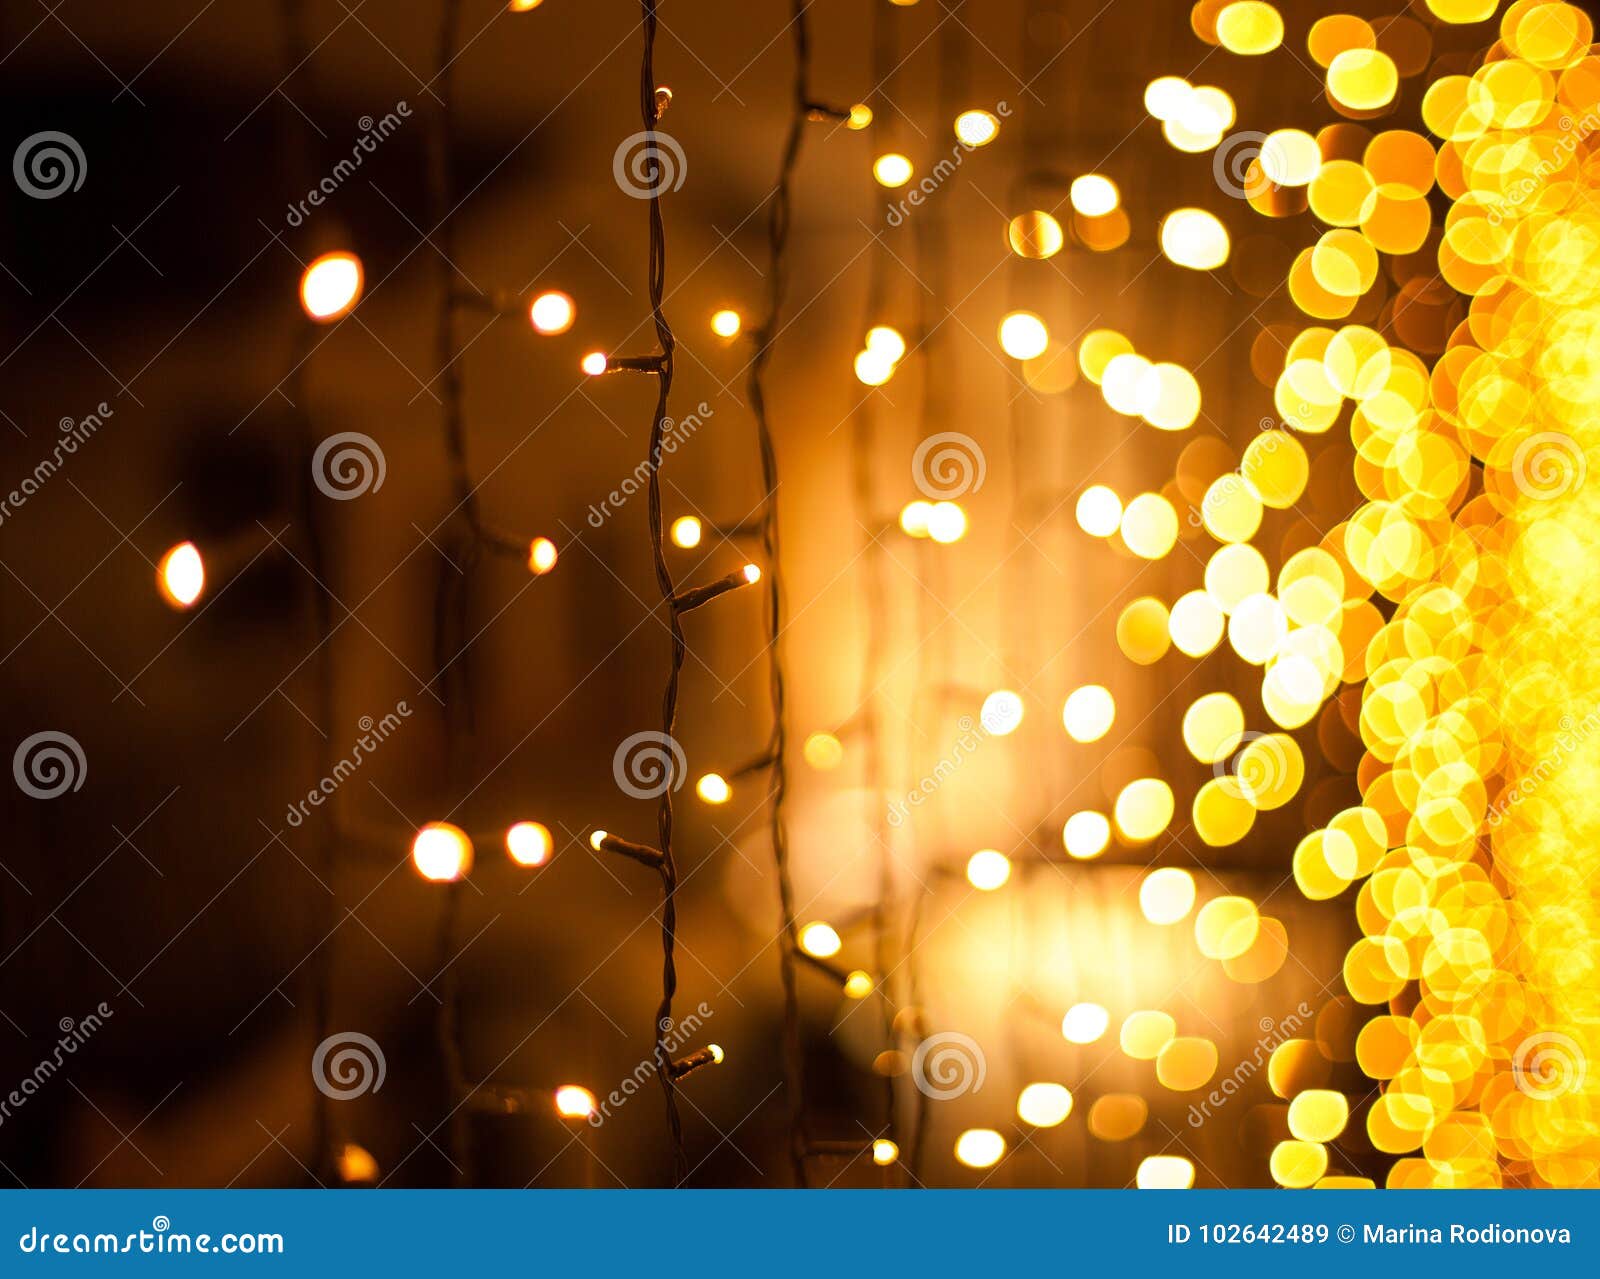 Festive Dark Blurred Background with Bokeh Lights, Garland and House Stock  Image - Image of electric, holiday: 102642489